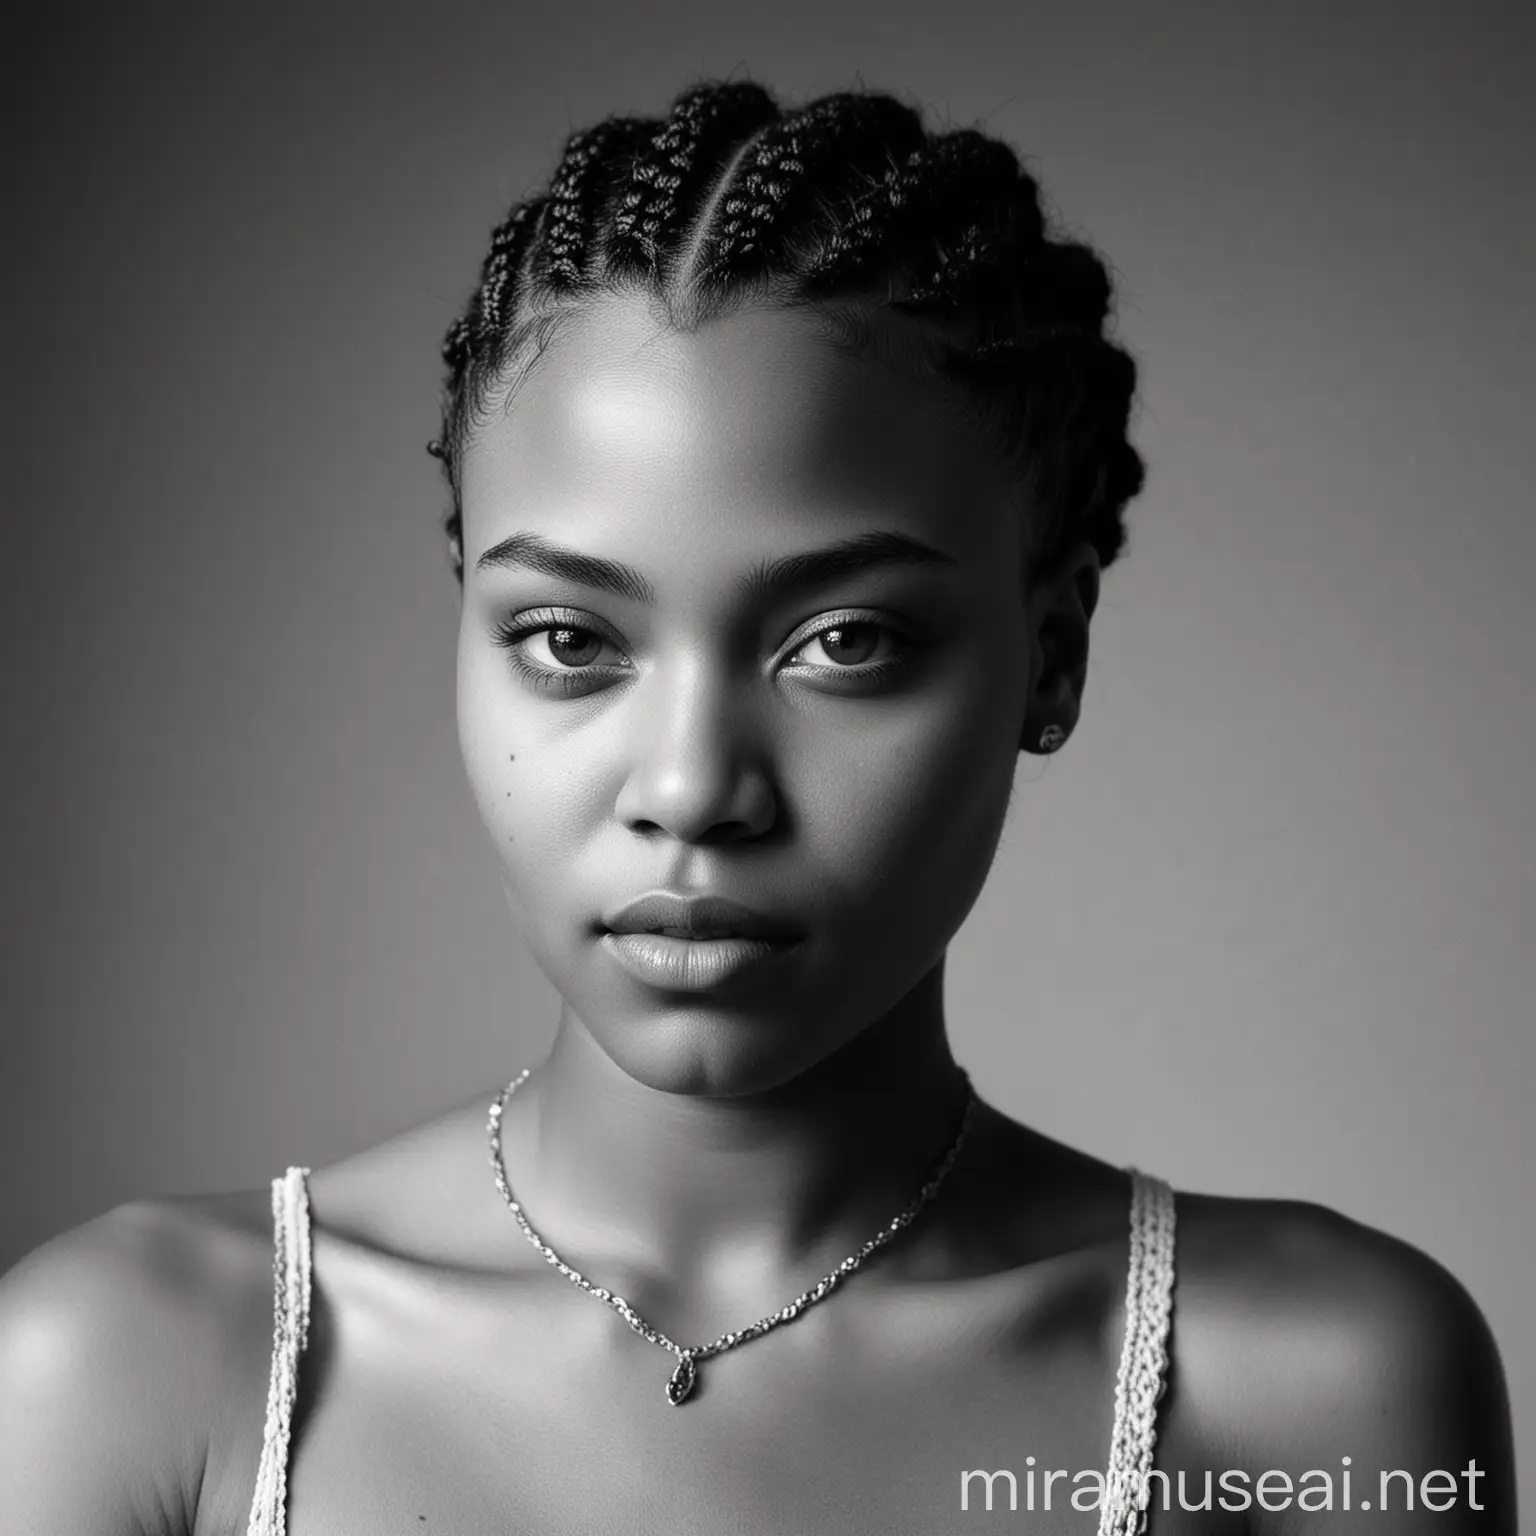 A black and white photograph of a strikingly beautiful black woman. The lighting is high contrast, emphasizing the beautiful nuances of her gorgeous black skin. She has very short braided hair in cornrows, with minimal to no makeup. Her shoulders are bare, adding to the raw, natural beauty of the portrait. The photograph is styled like a 90s film camera fashion shot. The background is plain white, allowing the subject to stand out. She is positioned at a unique angle, making the image striking and captivating. The woman is the sole subject in the image, embodying elegance and strength.

